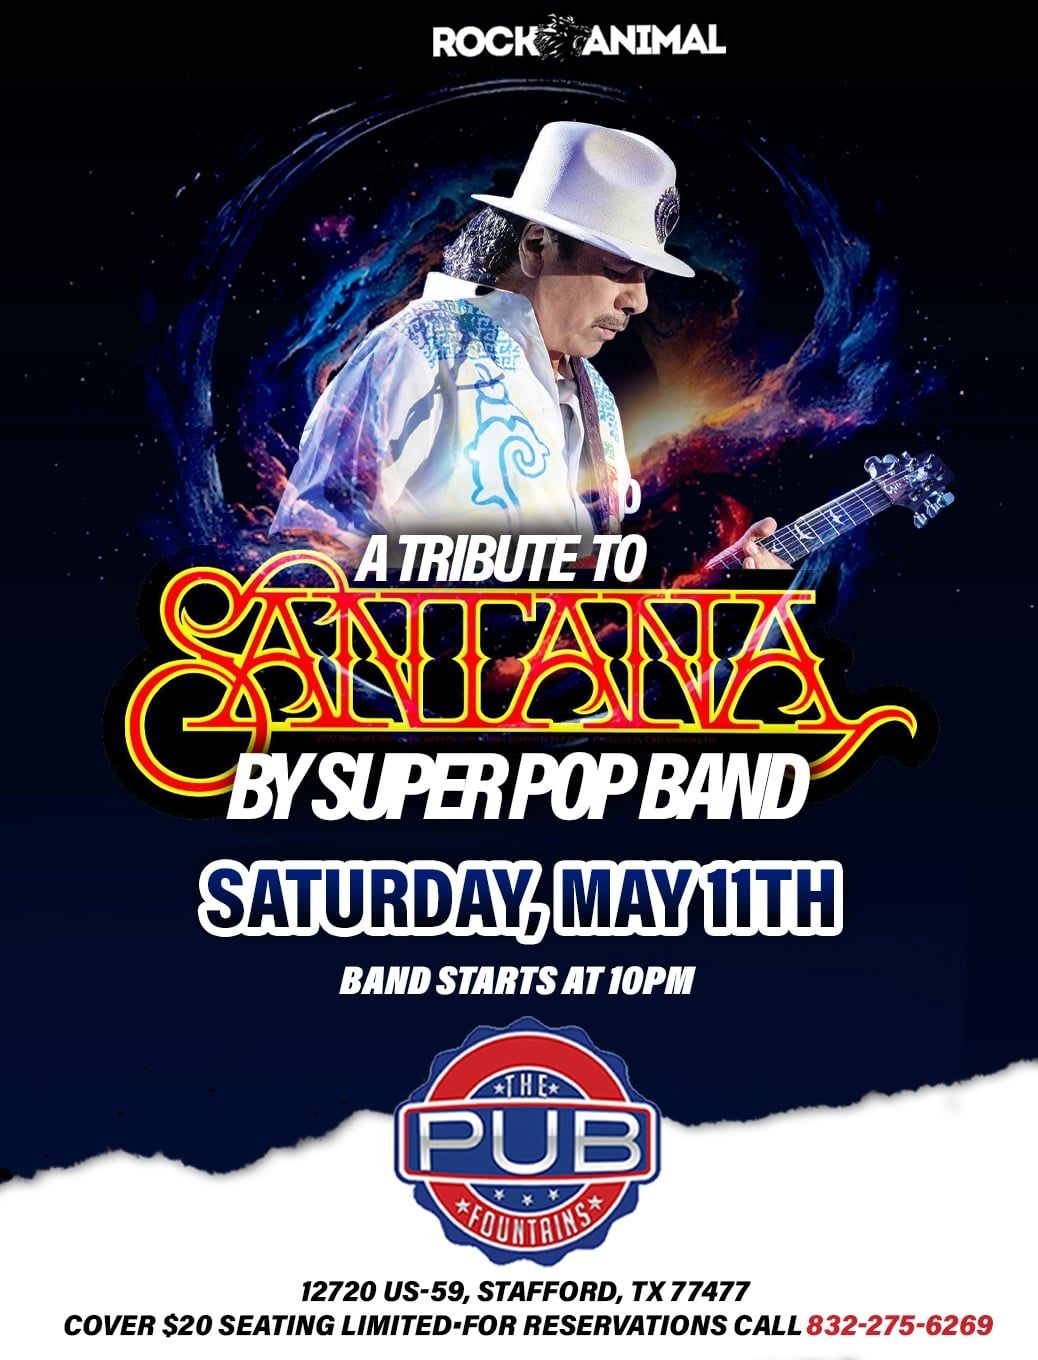 A tribute to SANTANA performed by Super Pop